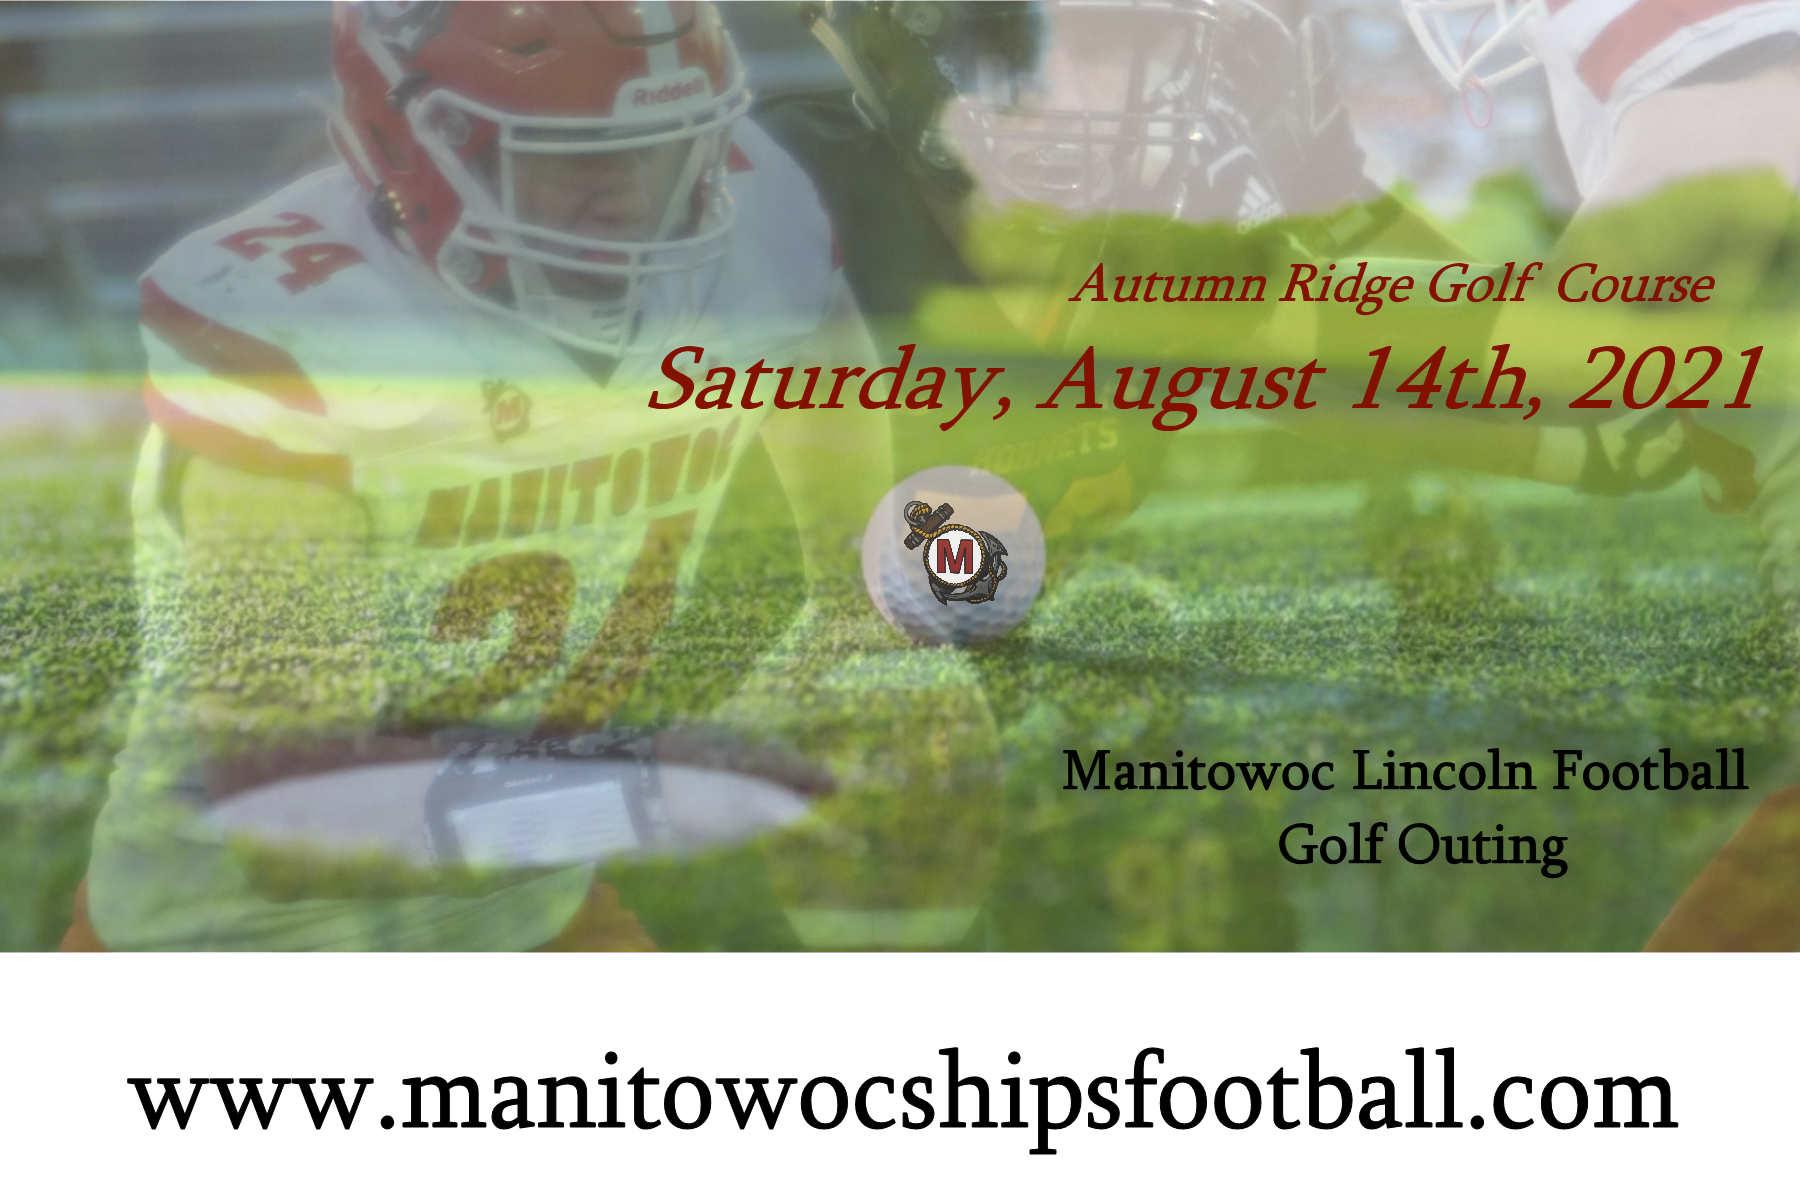 2021 Manitowoc Lincoln Football Golf Outing